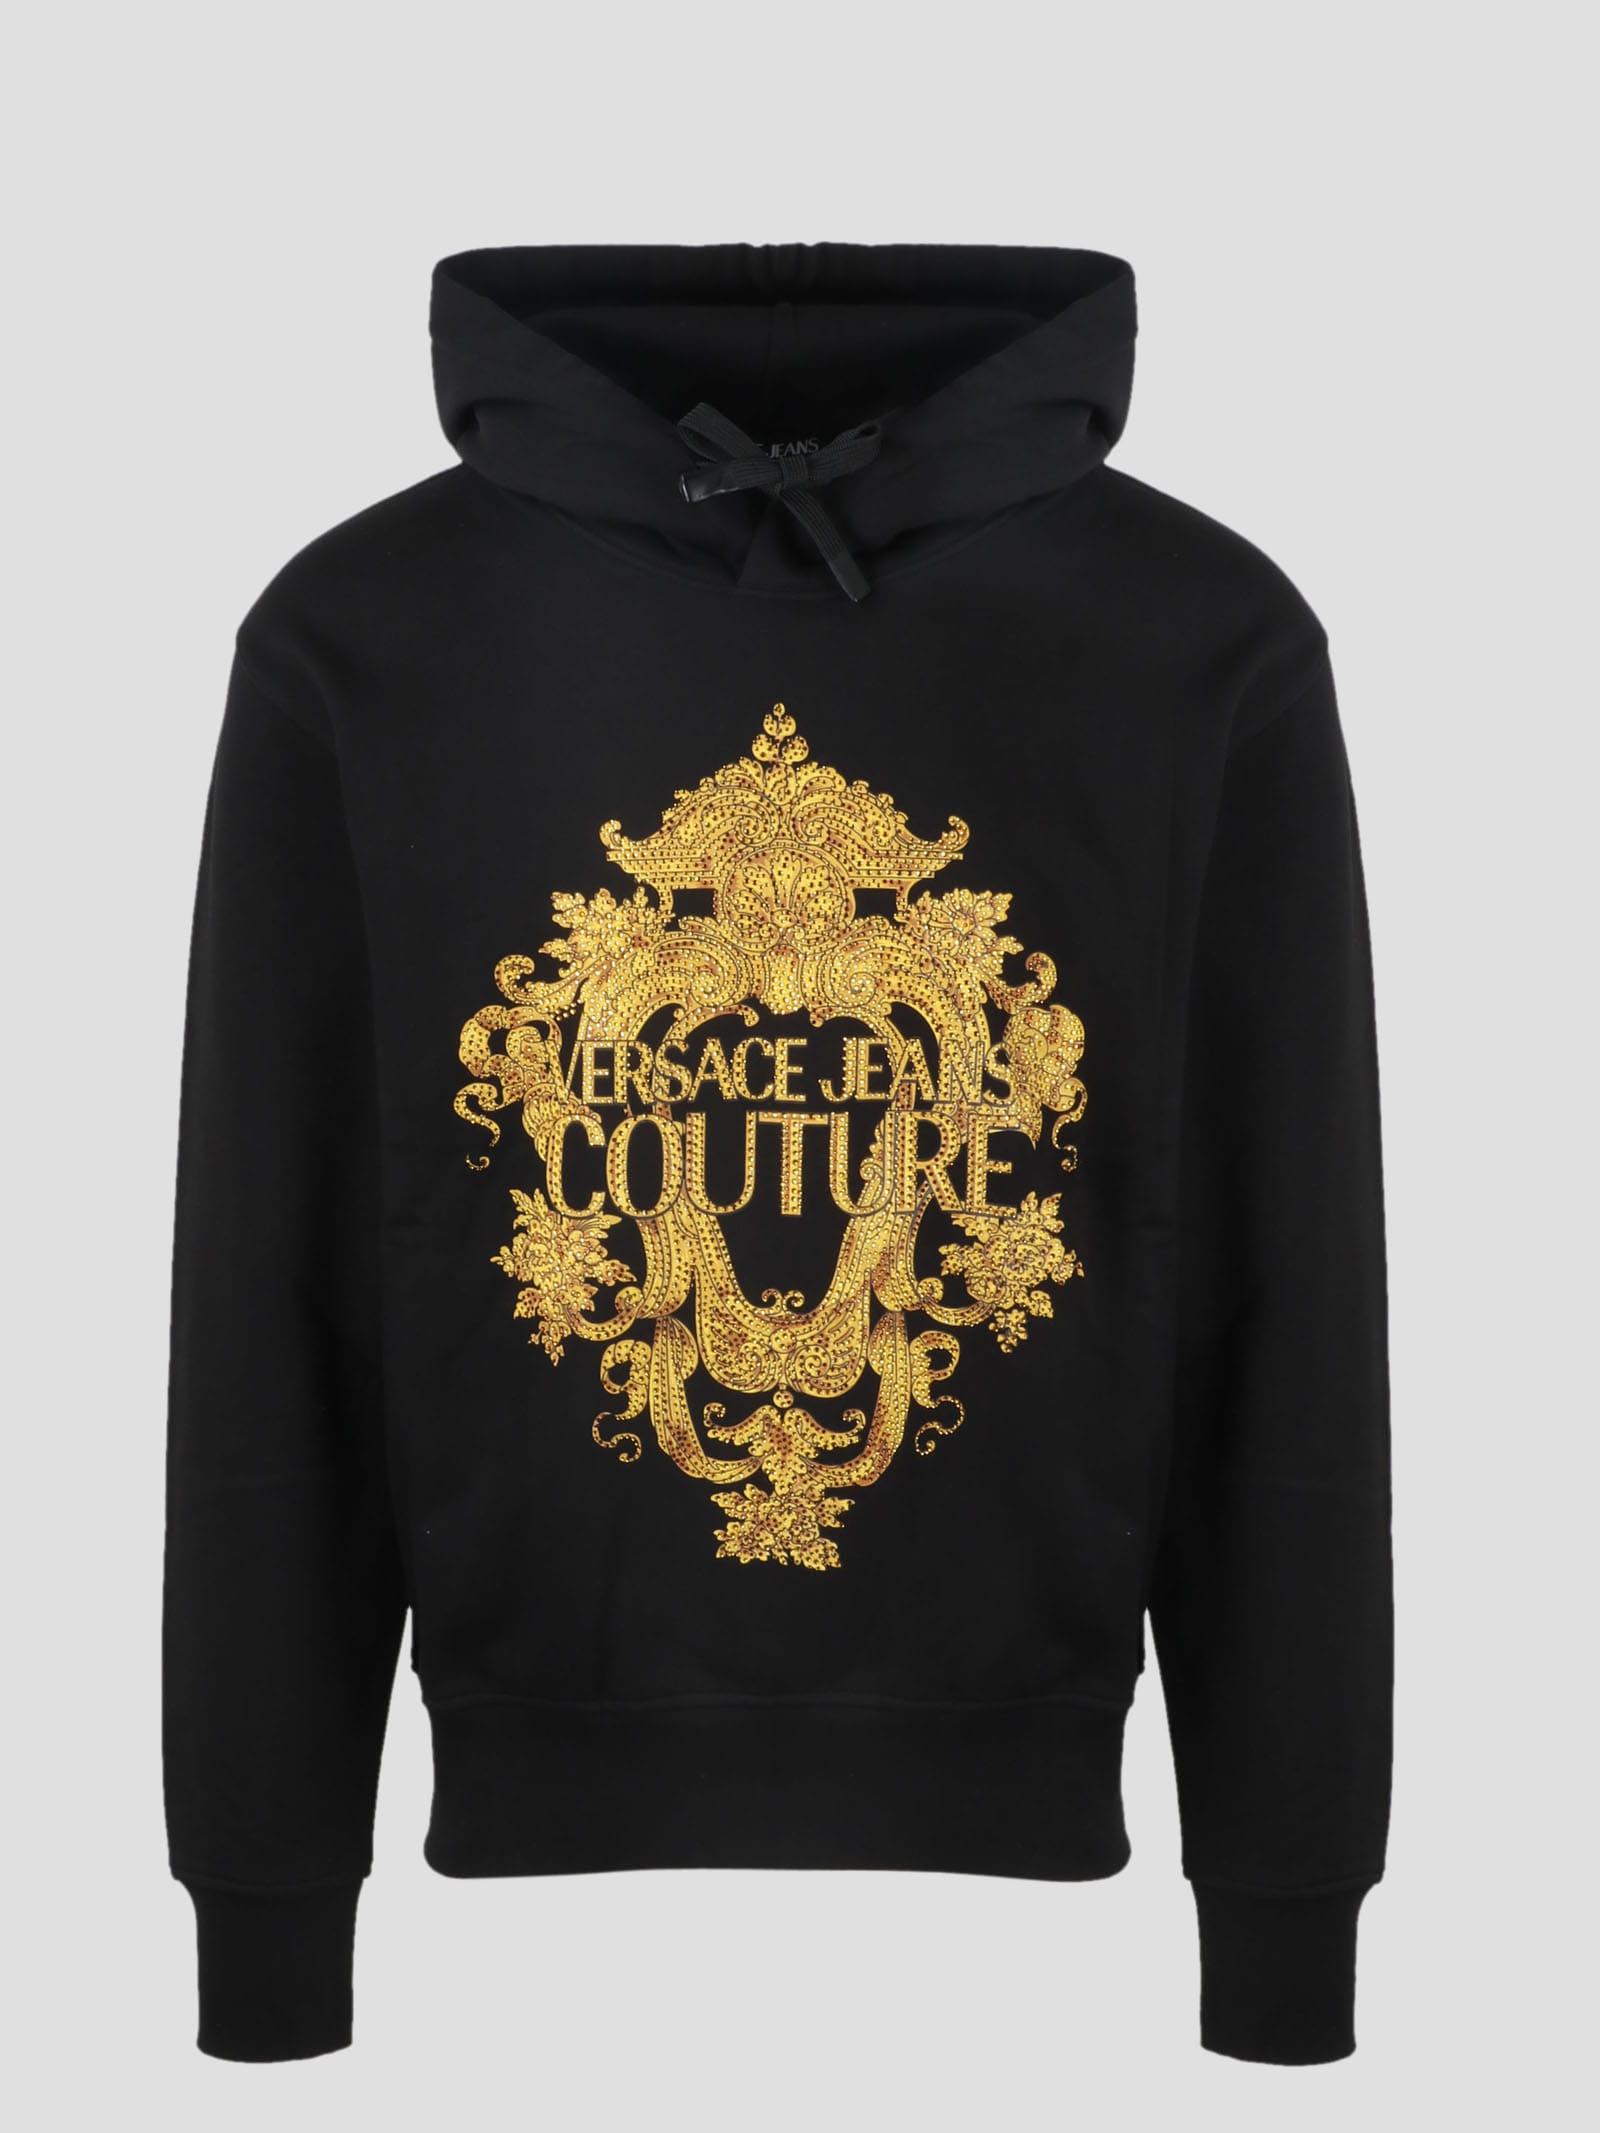 Versace Jeans Couture Crystals Baroque Hoodie